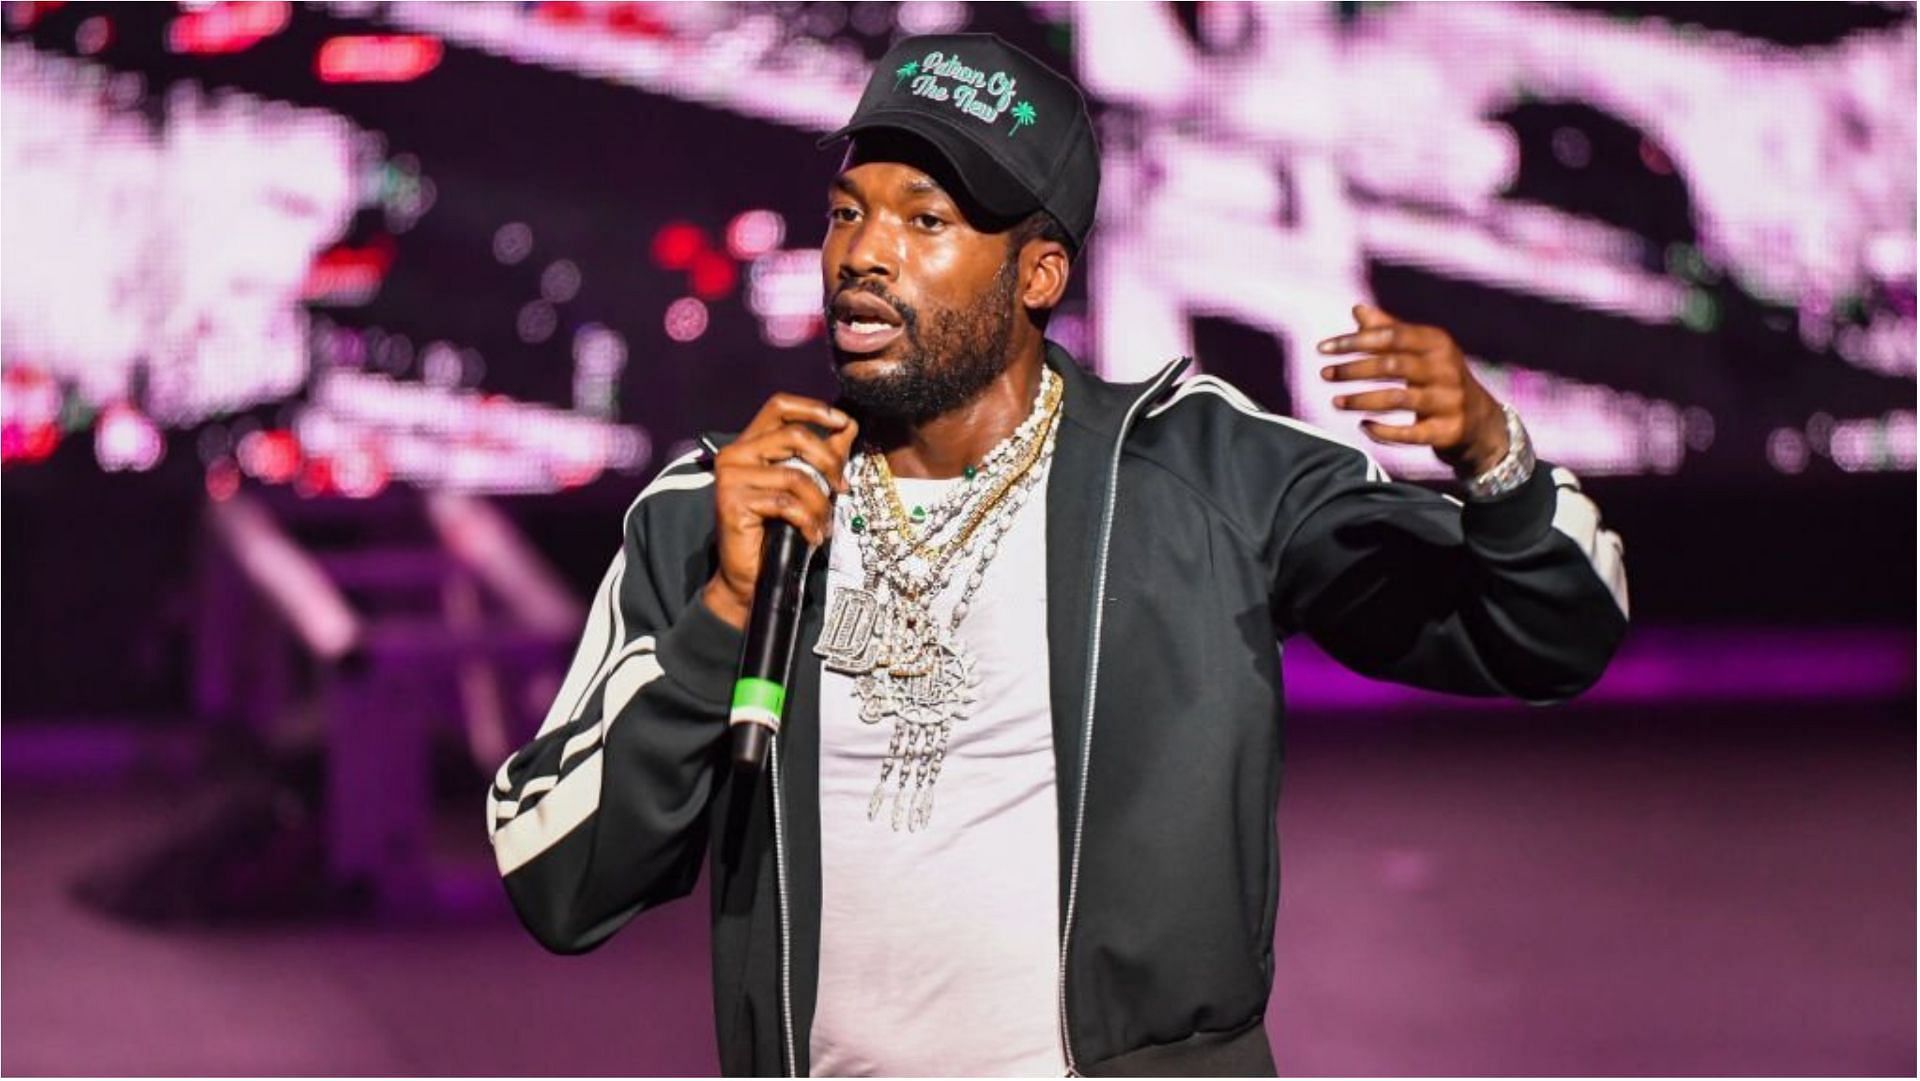 Meek Mill&#039;s phone was stolen while he was trying to find his way out of the crowd (Image via Aaron J. Thornton/Getty Images)